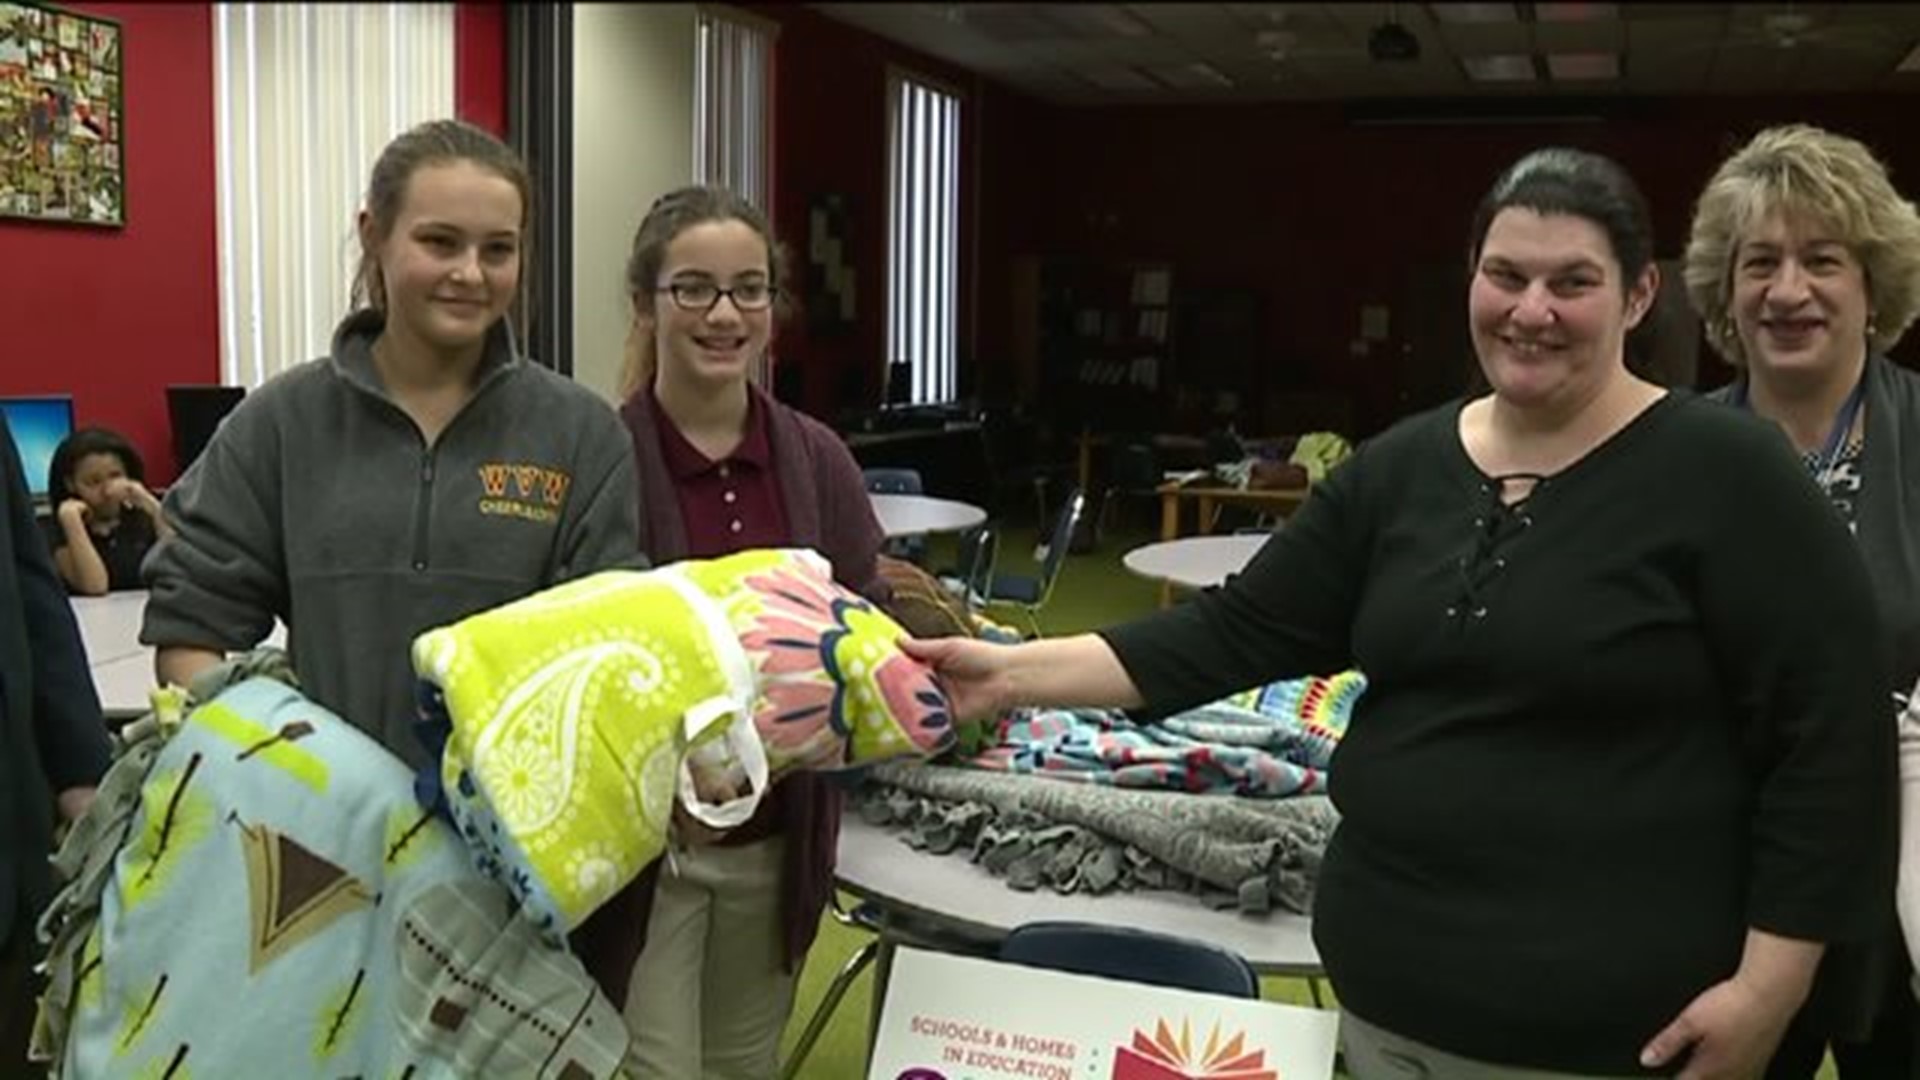 Donating Blankets to Help Women in Need